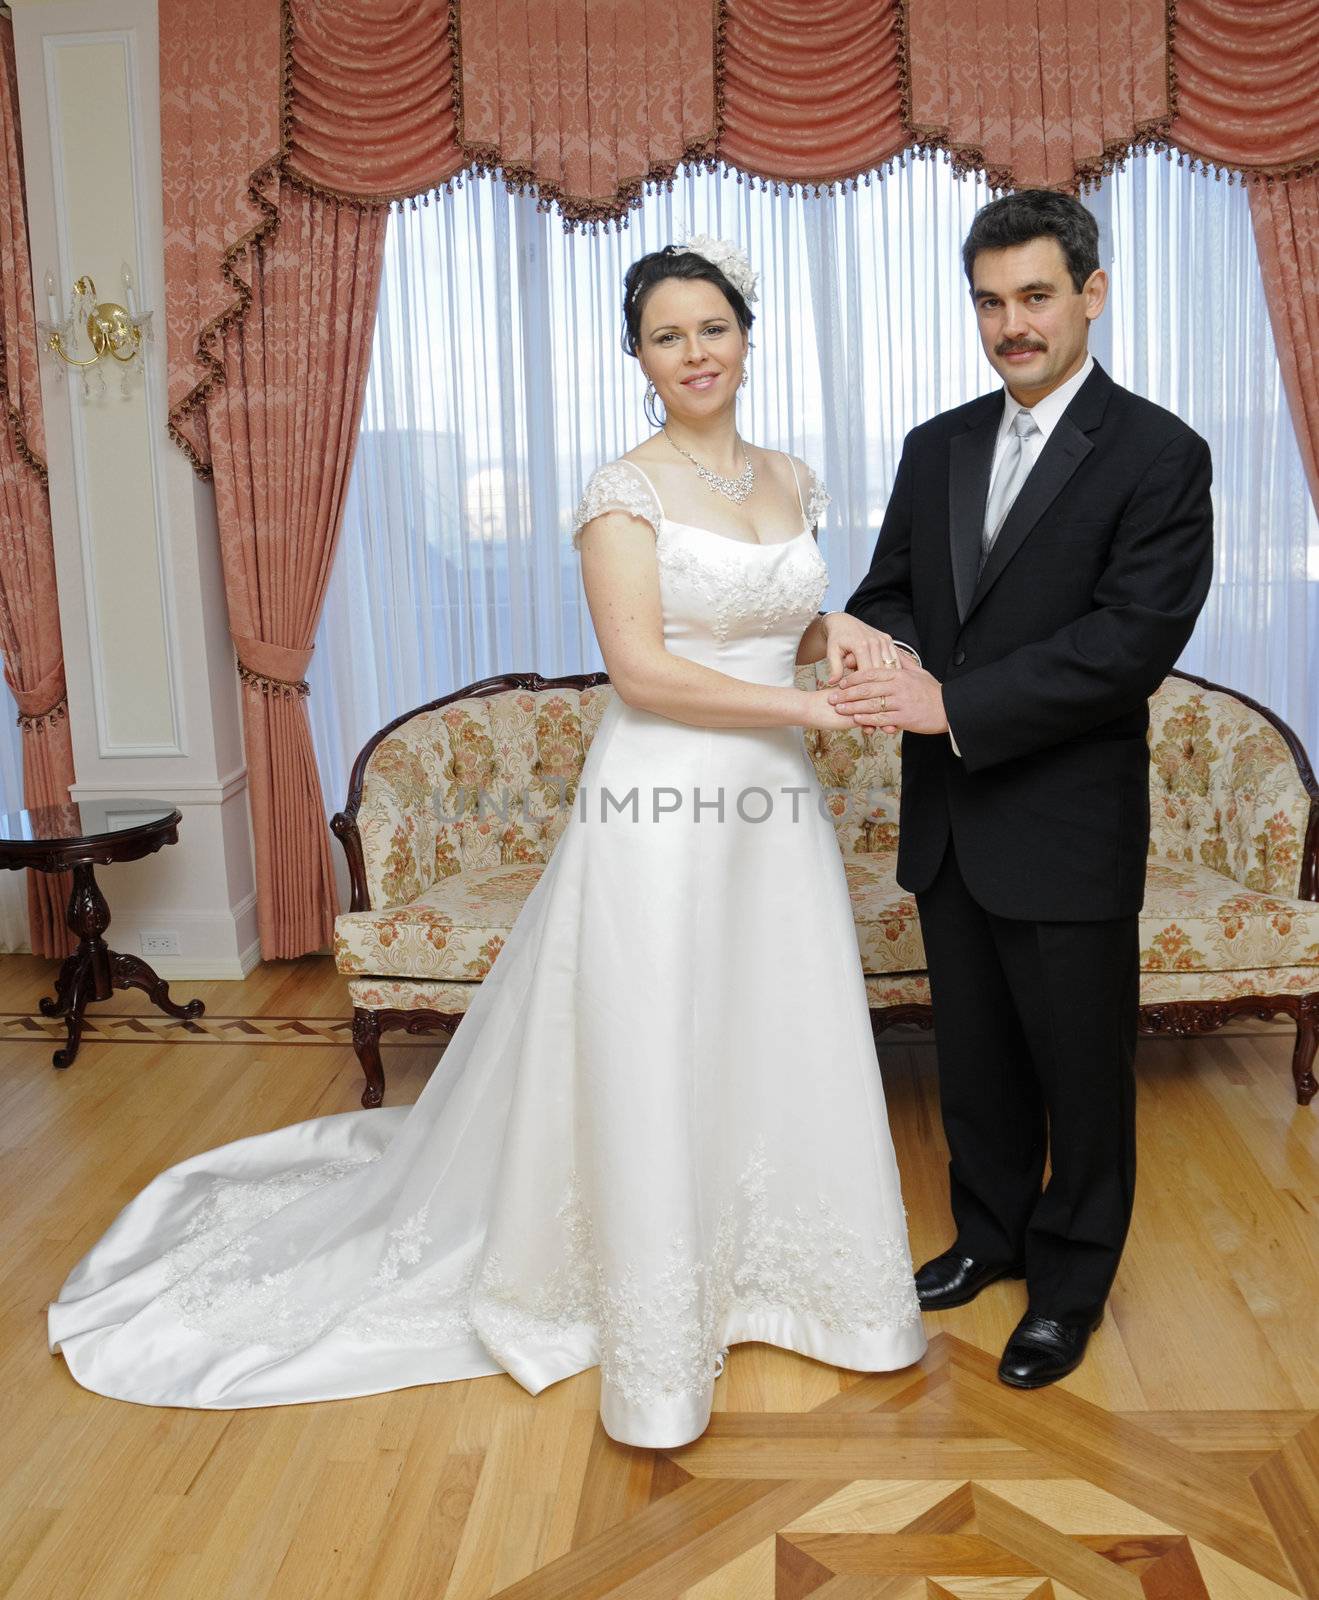 Bride and Groom - formal wedding image in Russian consulate, San Francisco